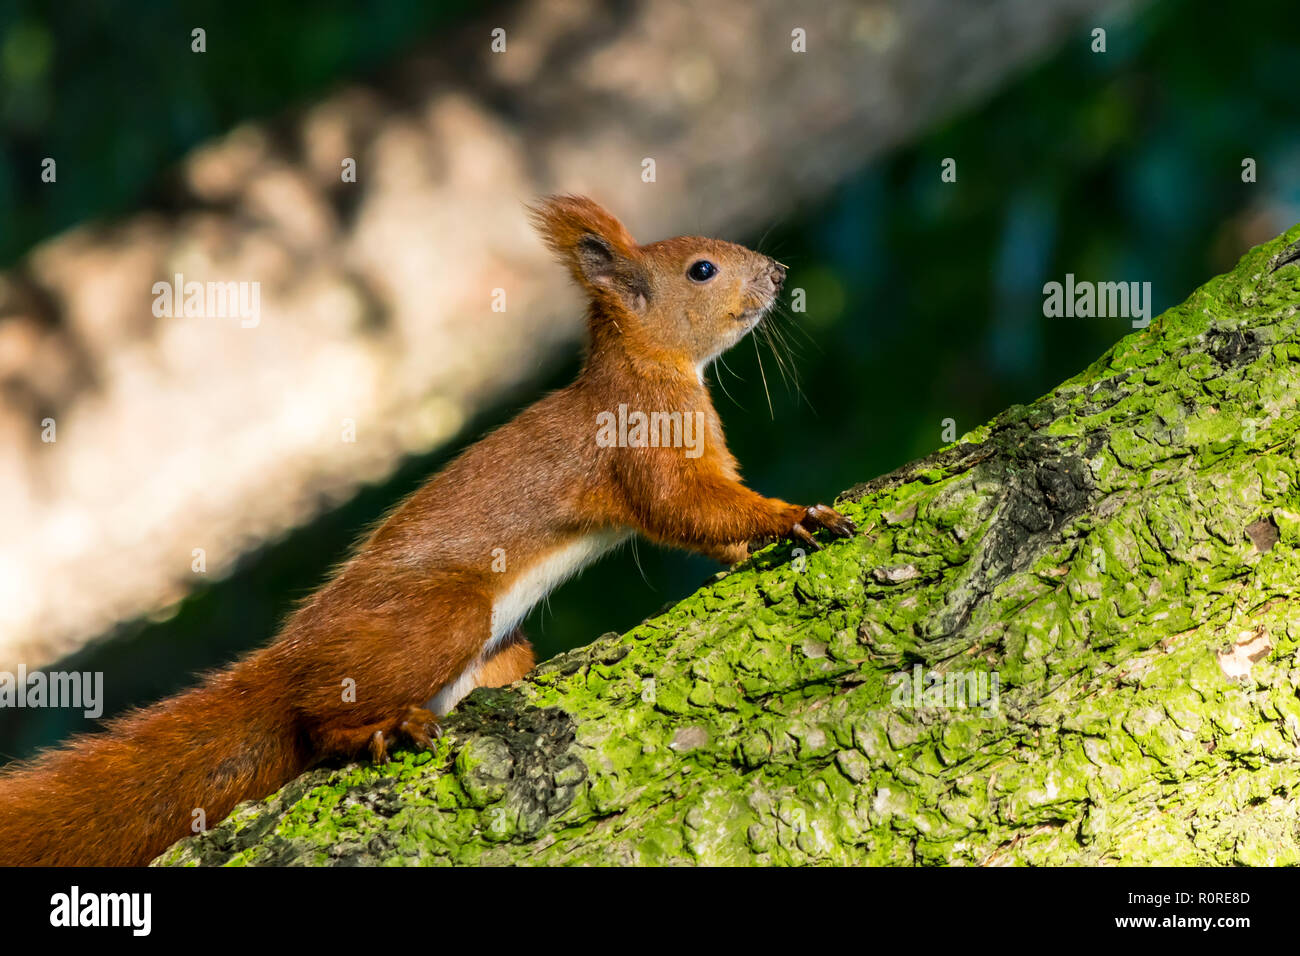 Squirrel close-up in the forest in a natural environment Stock Photo